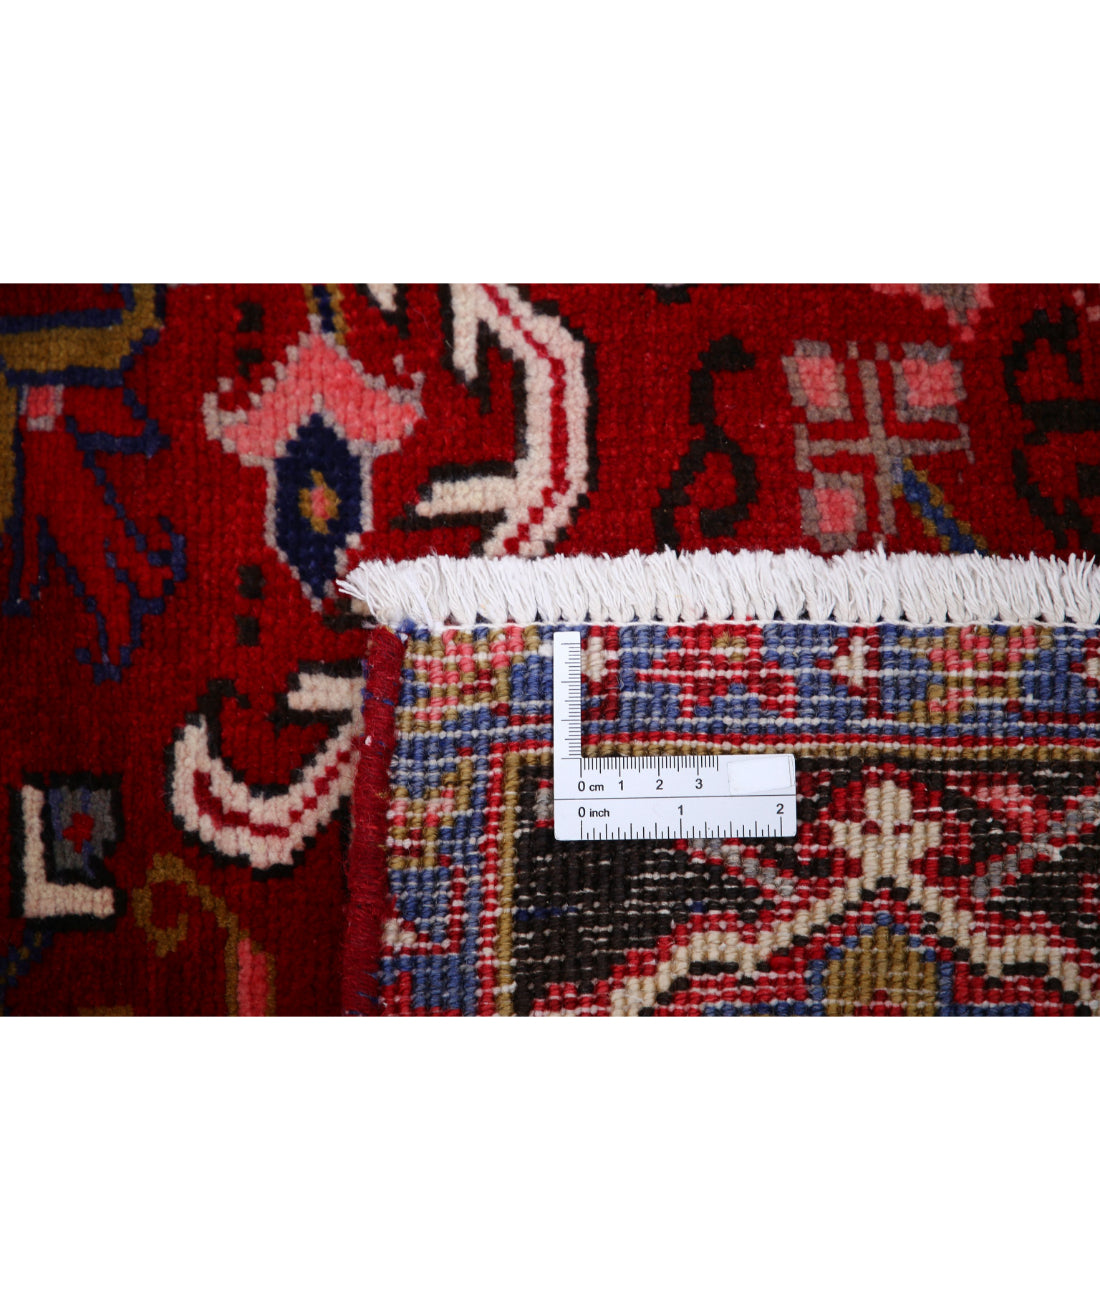 Heriz 8'1'' X 11'2'' Hand-Knotted Wool Rug 8'1'' x 11'2'' (243 X 335) / Red / Blue